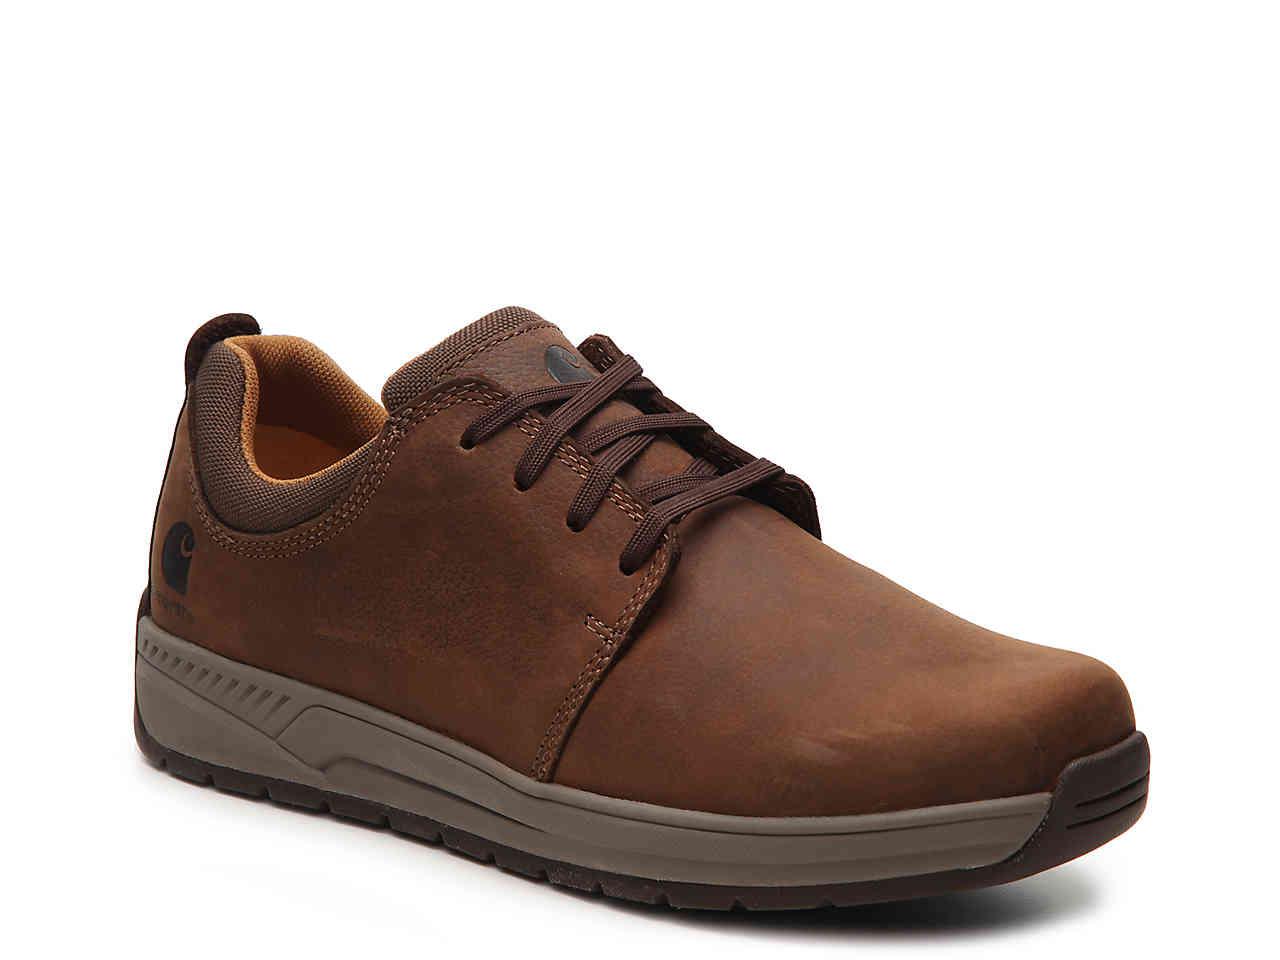 Carhartt Leather Oxford Work Shoe in Brown for Men - Lyst